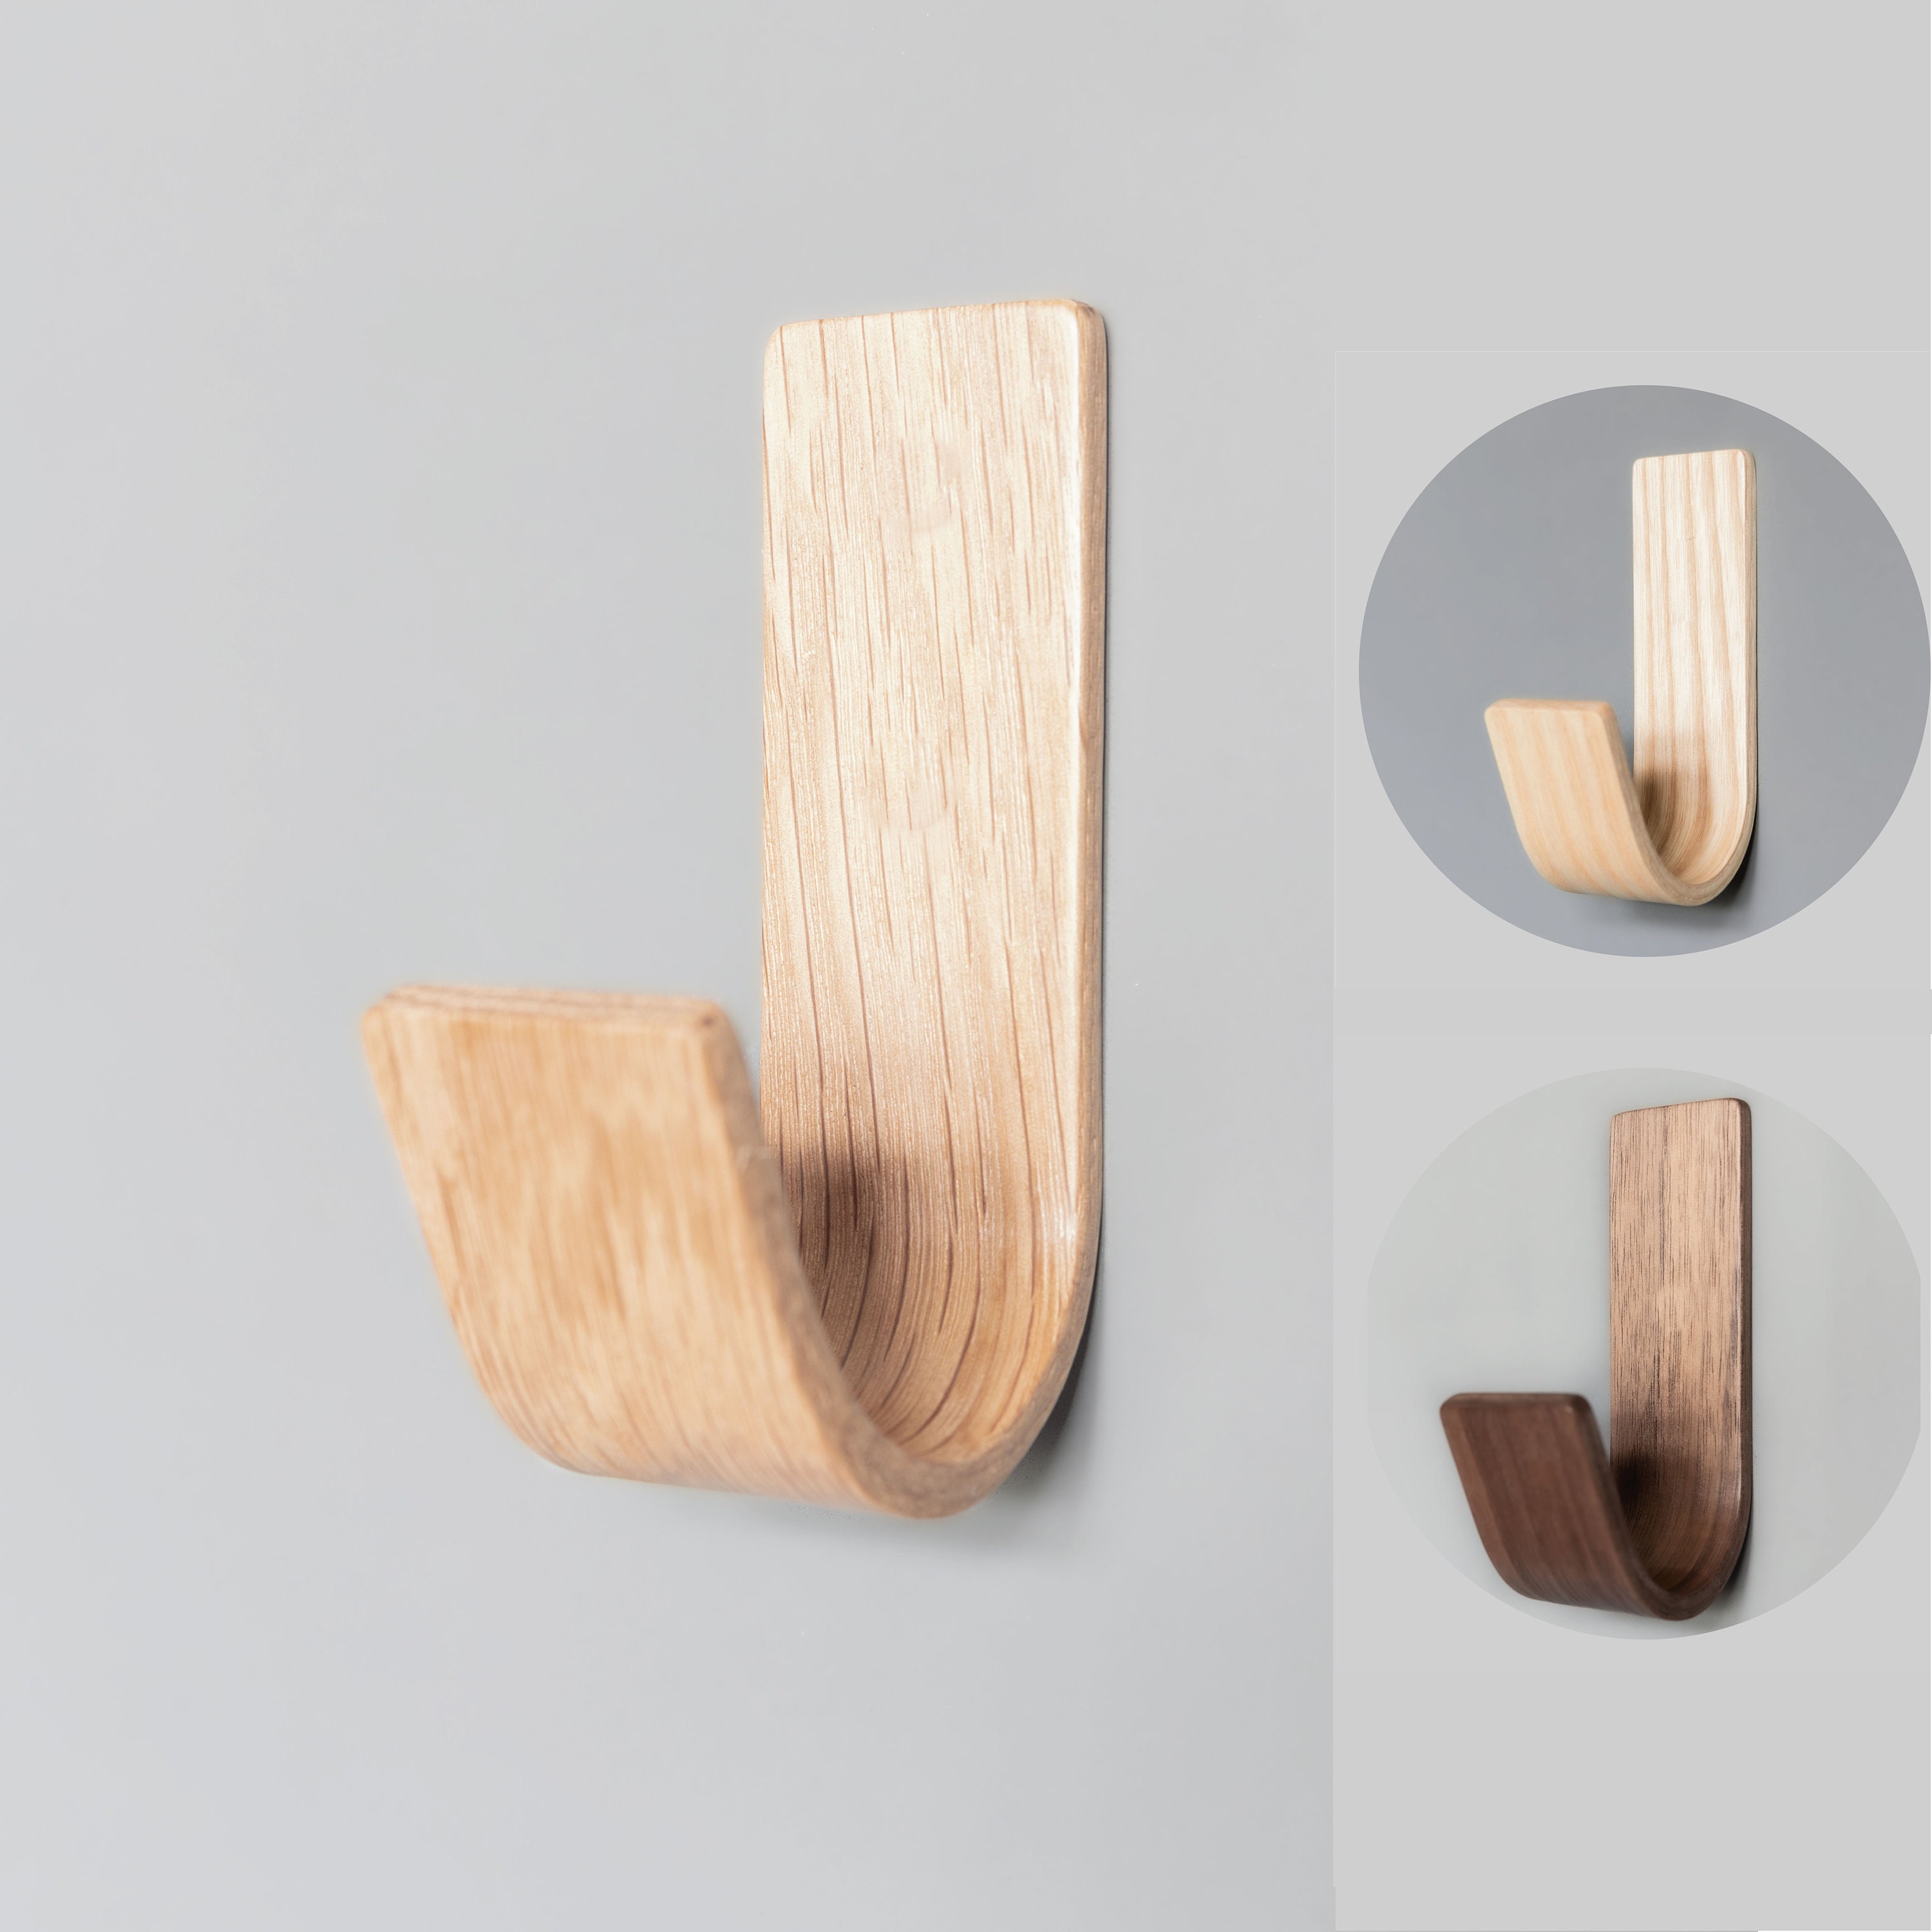 Adhesive Wooden Wall Hooks 1kg Hold Weight Modern Design Damage Free  Storage Solution Tea Towels Hats and Light Garments 